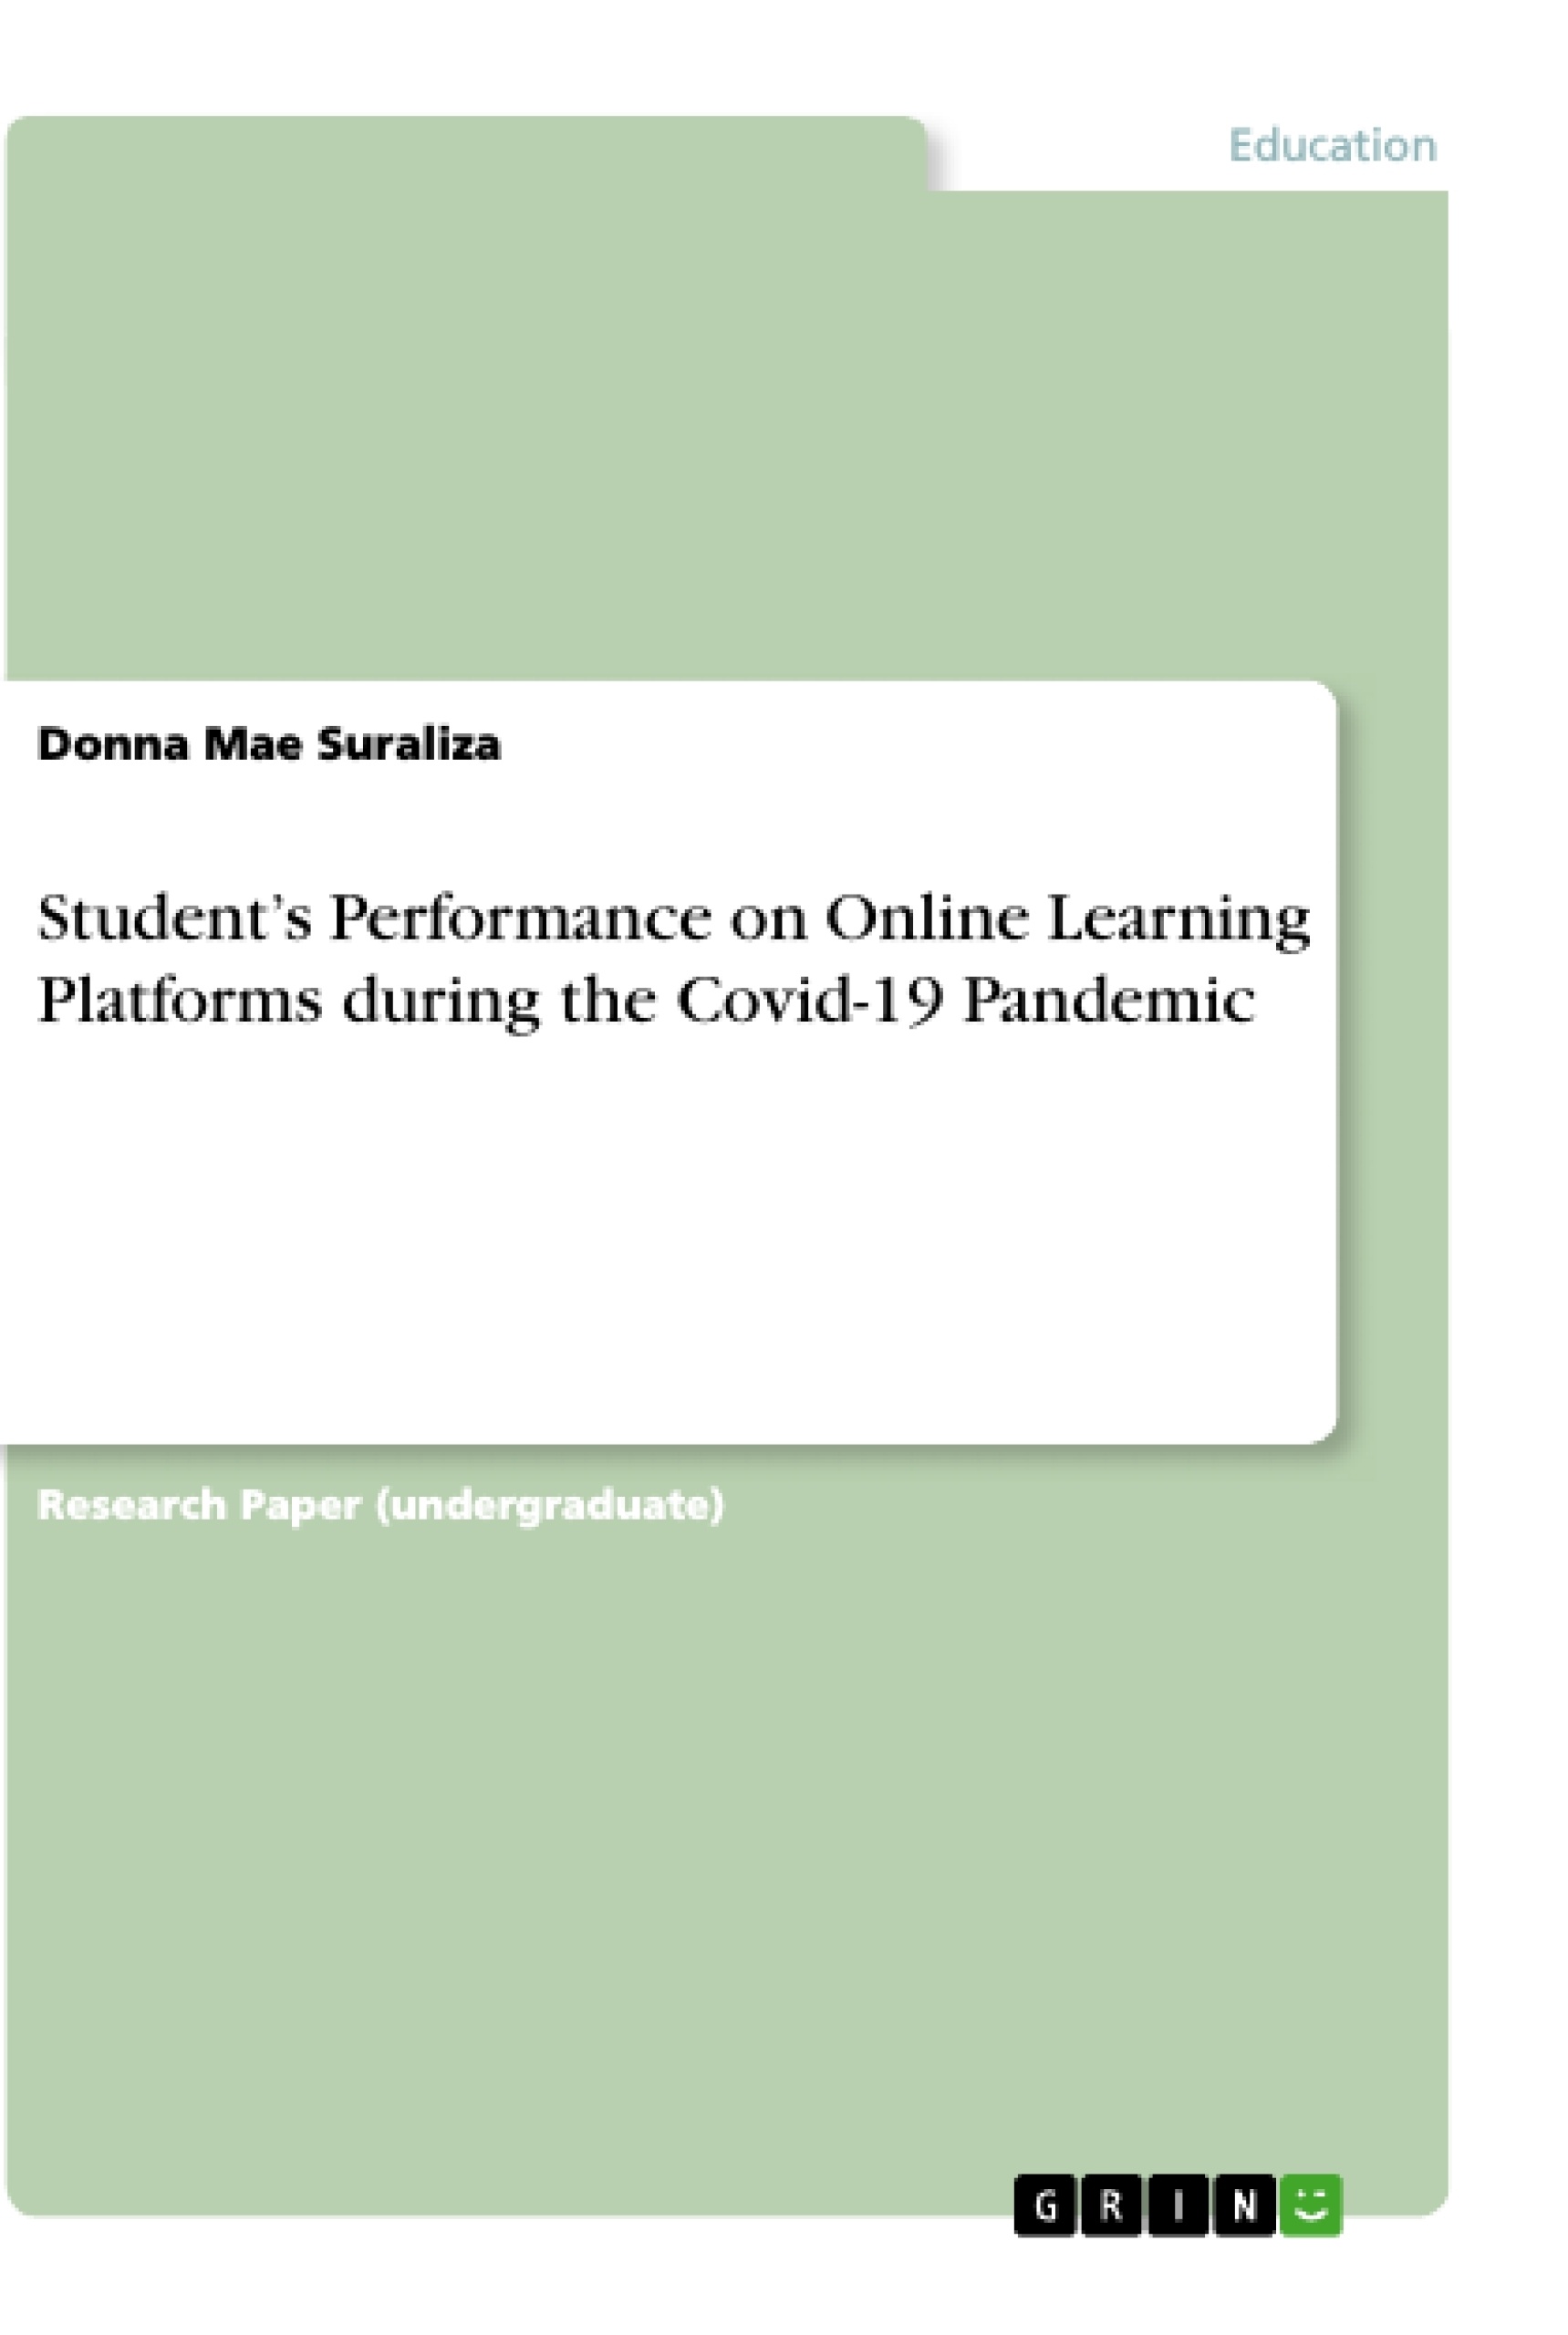 Title: Student’s Performance on Online Learning Platforms during the Covid-19 Pandemic